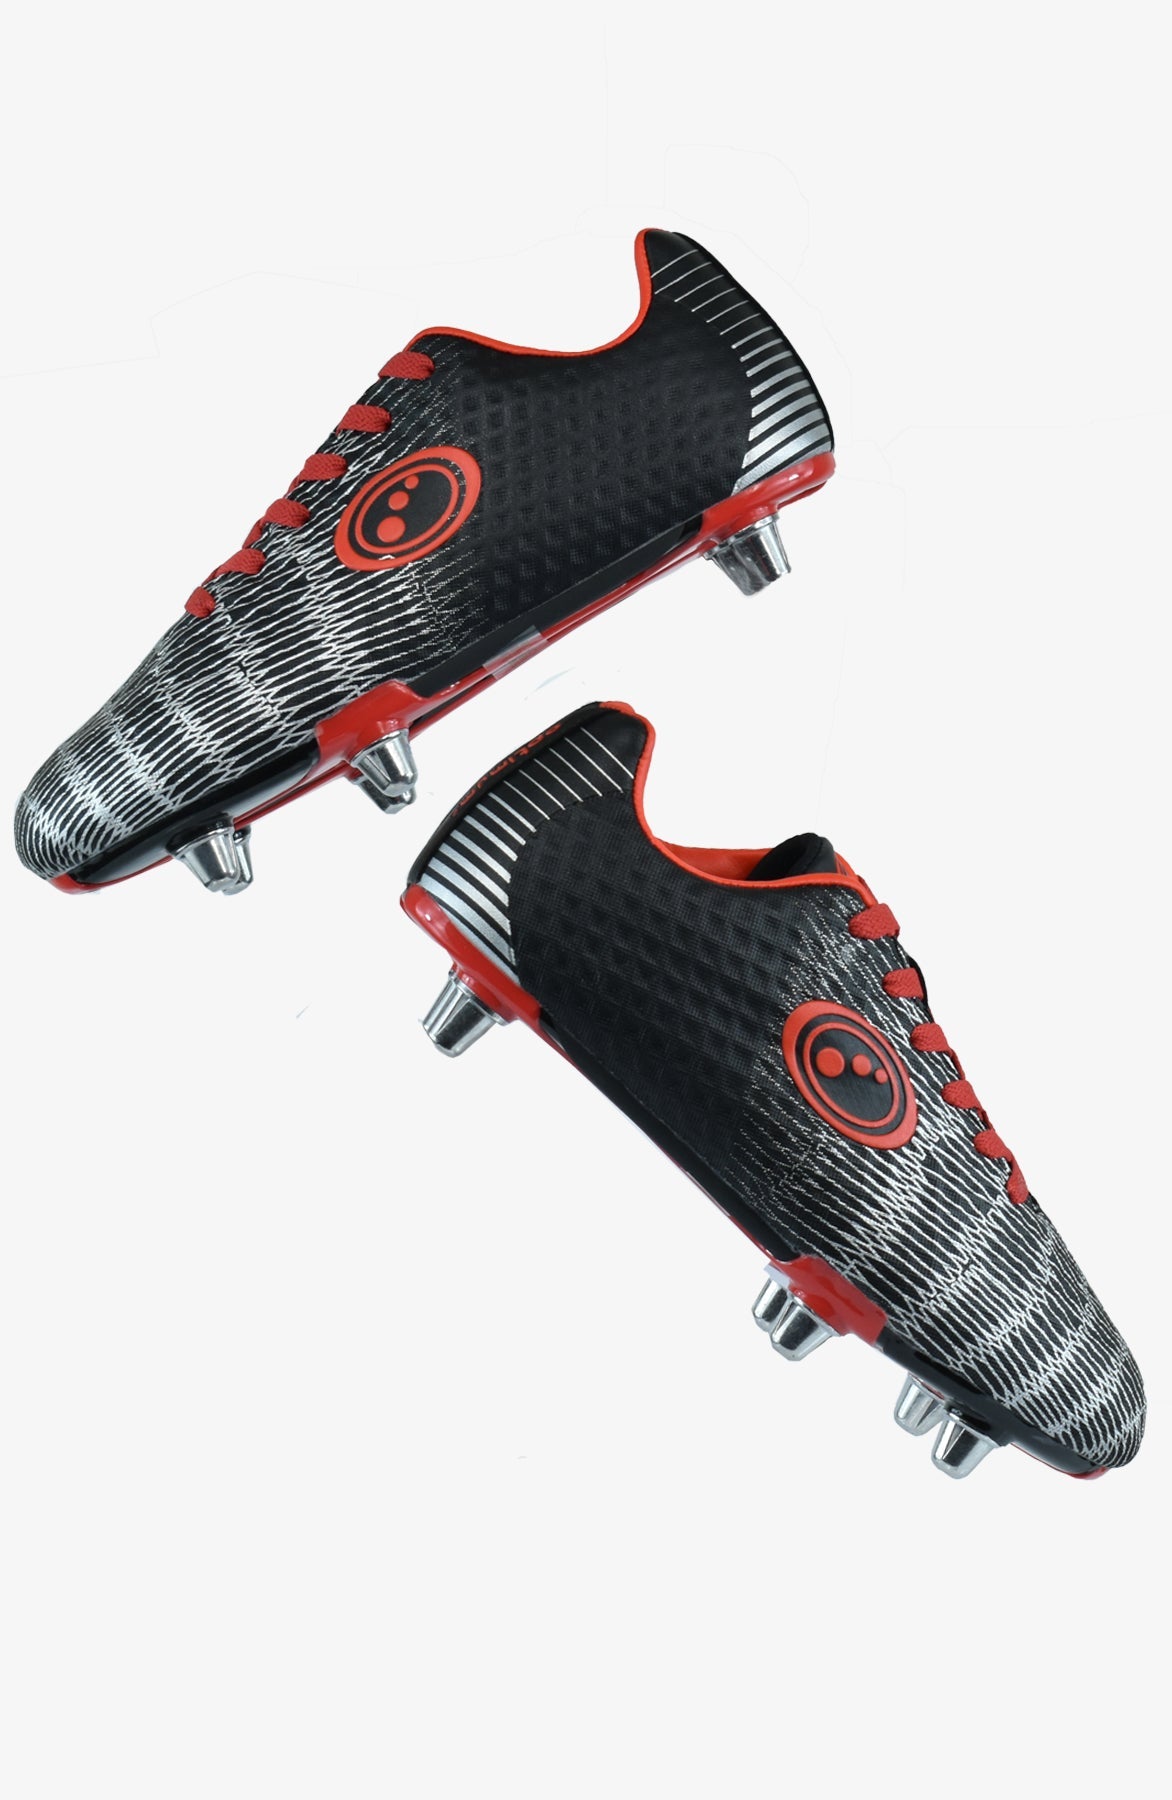 Junior Viper Lace Up 6 Stud Rugby Boot Black / Red - Optimum